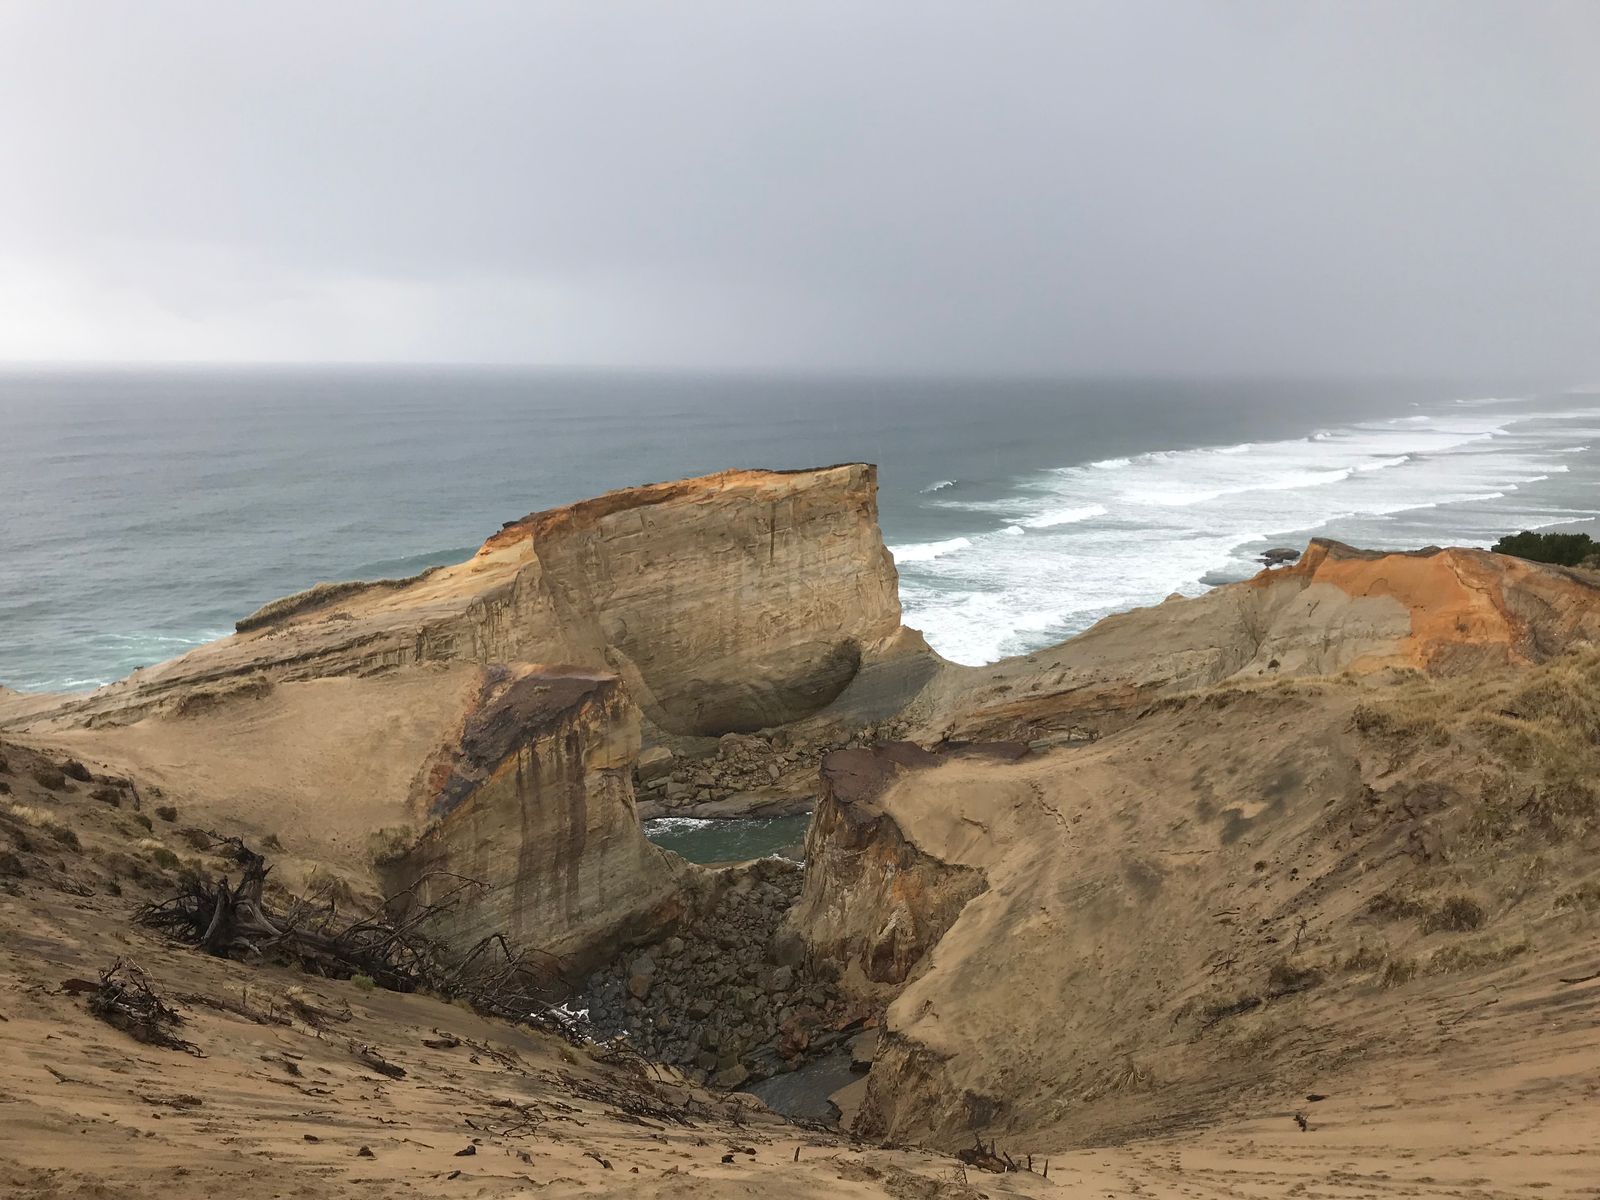 Unreal view at Pacific City, with ocean in the back and sand dunes and cliffs in the forfront.